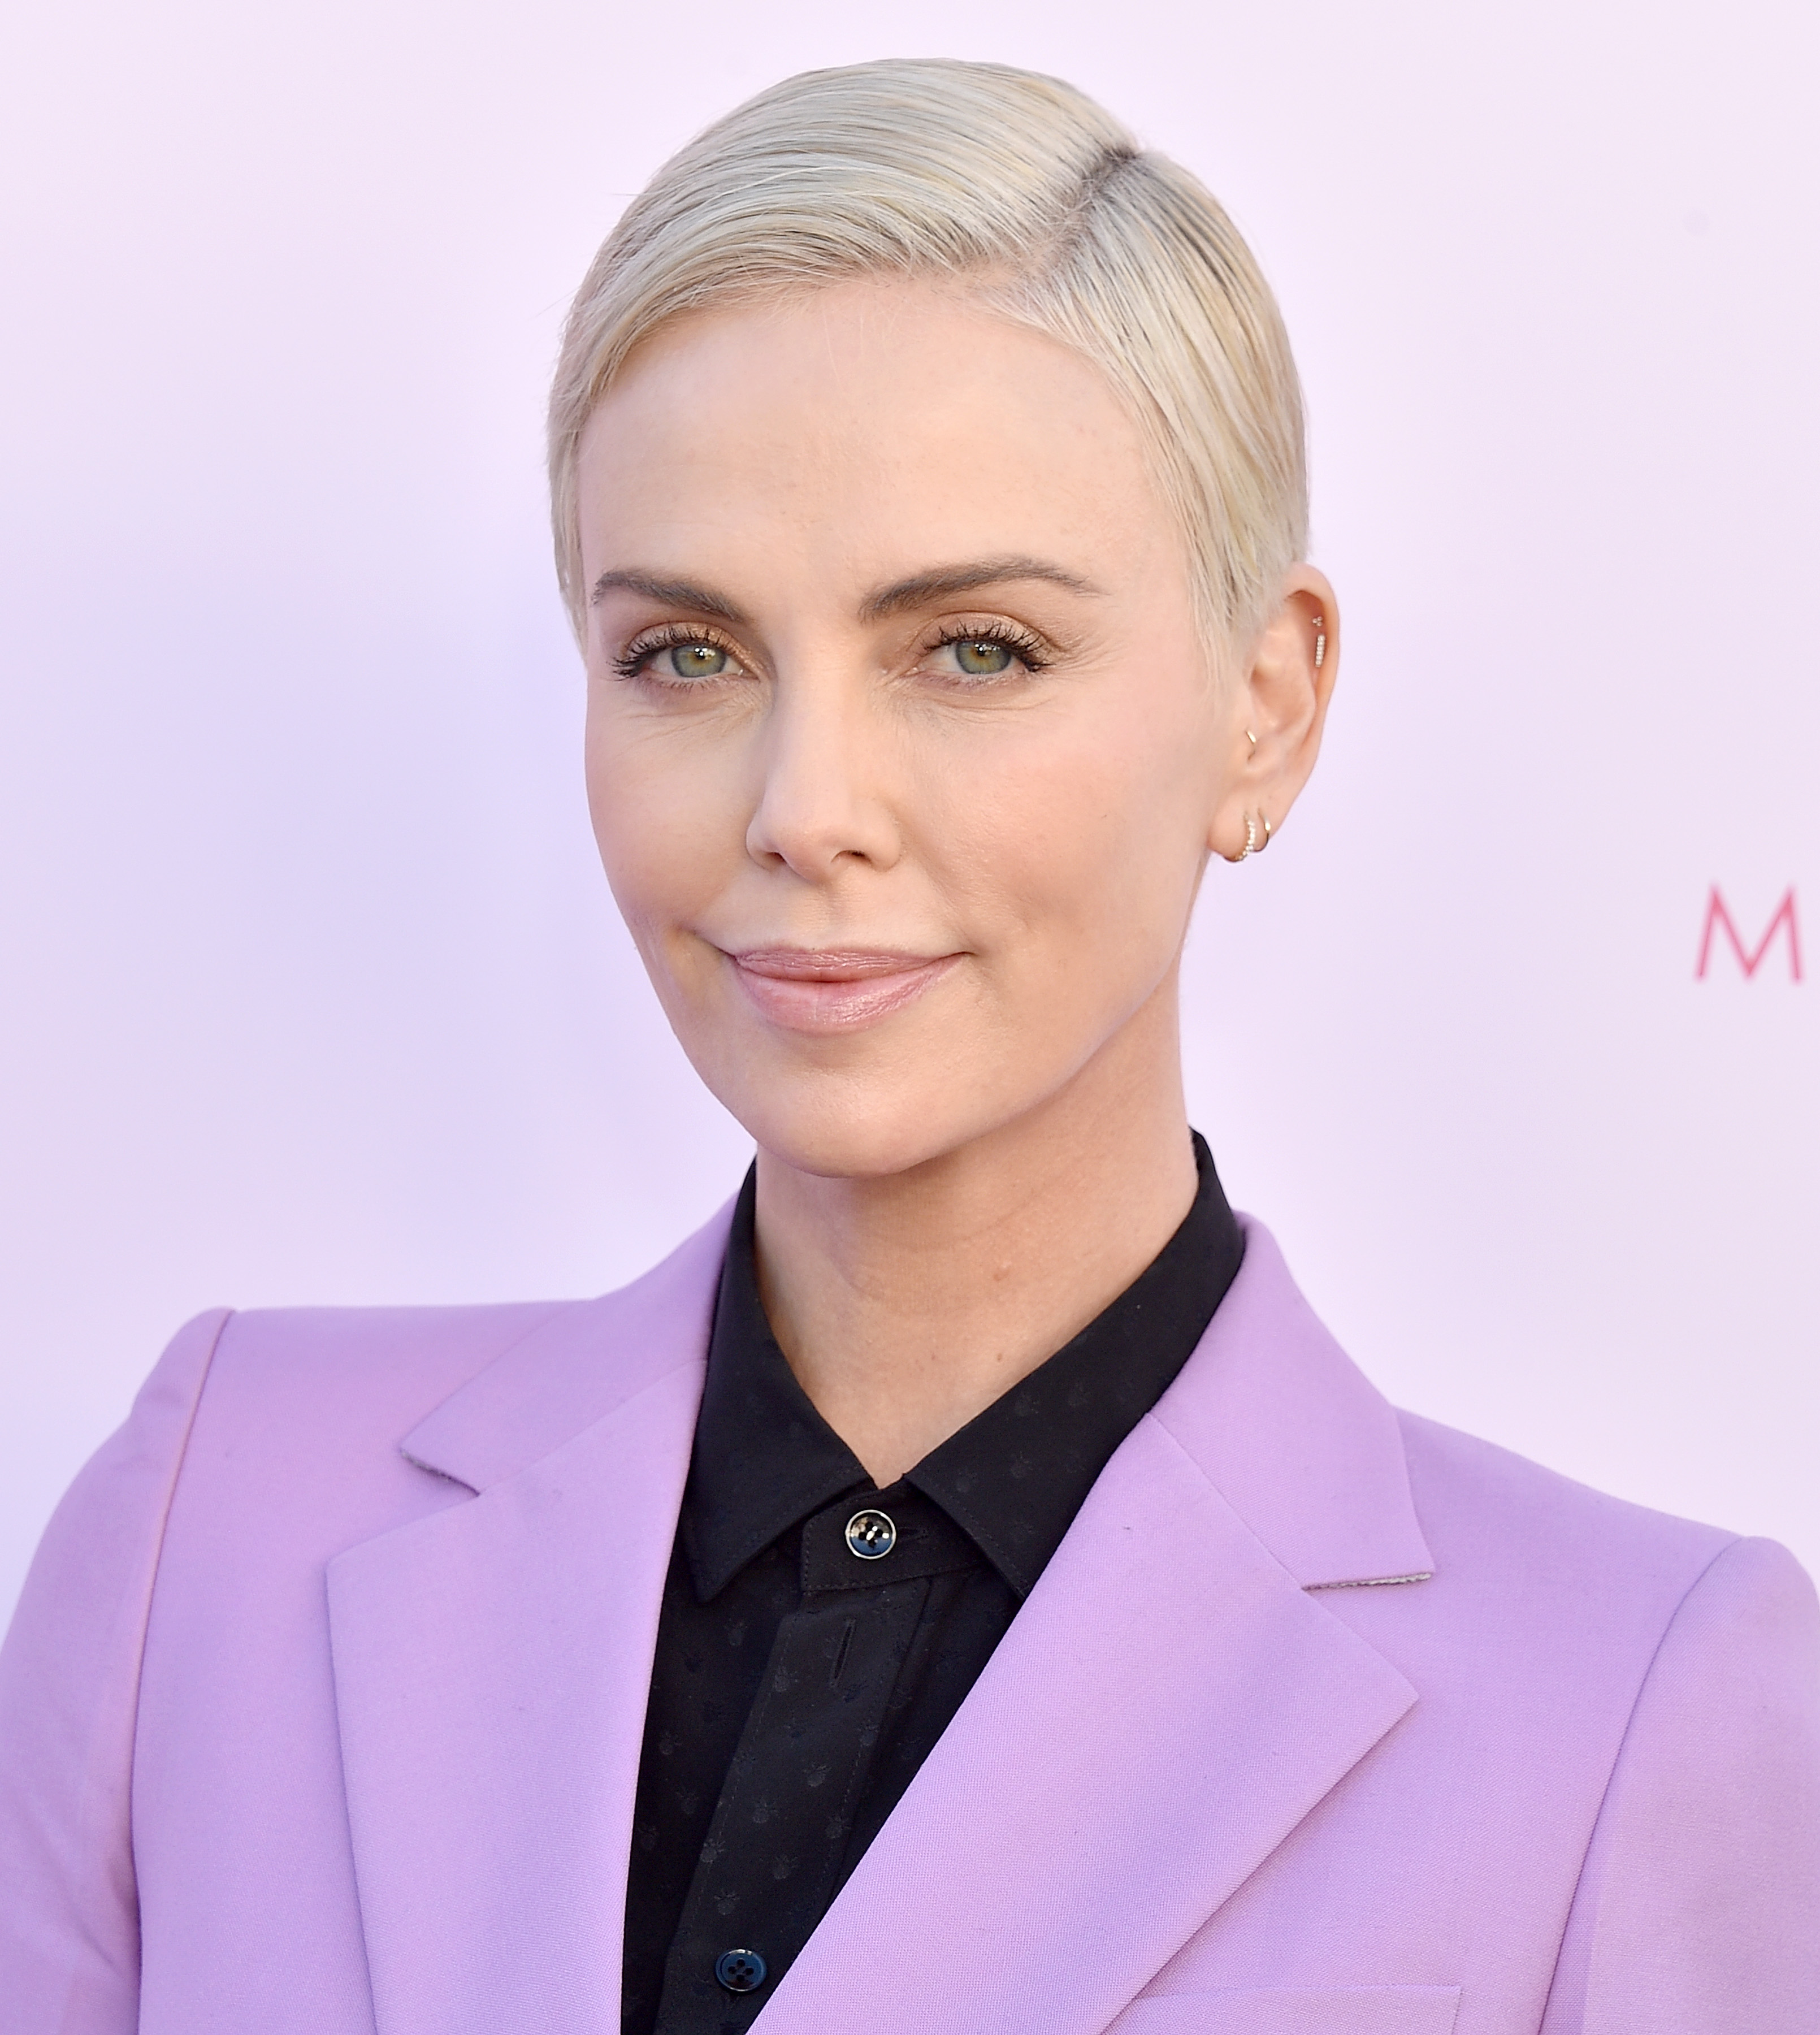 Charlize Theron at The Hollywood Reporter's Annual Women in Entertainment Breakfast Gala at Milk Studios on December 11, 2019 in Hollywood, California | Source: Getty Images